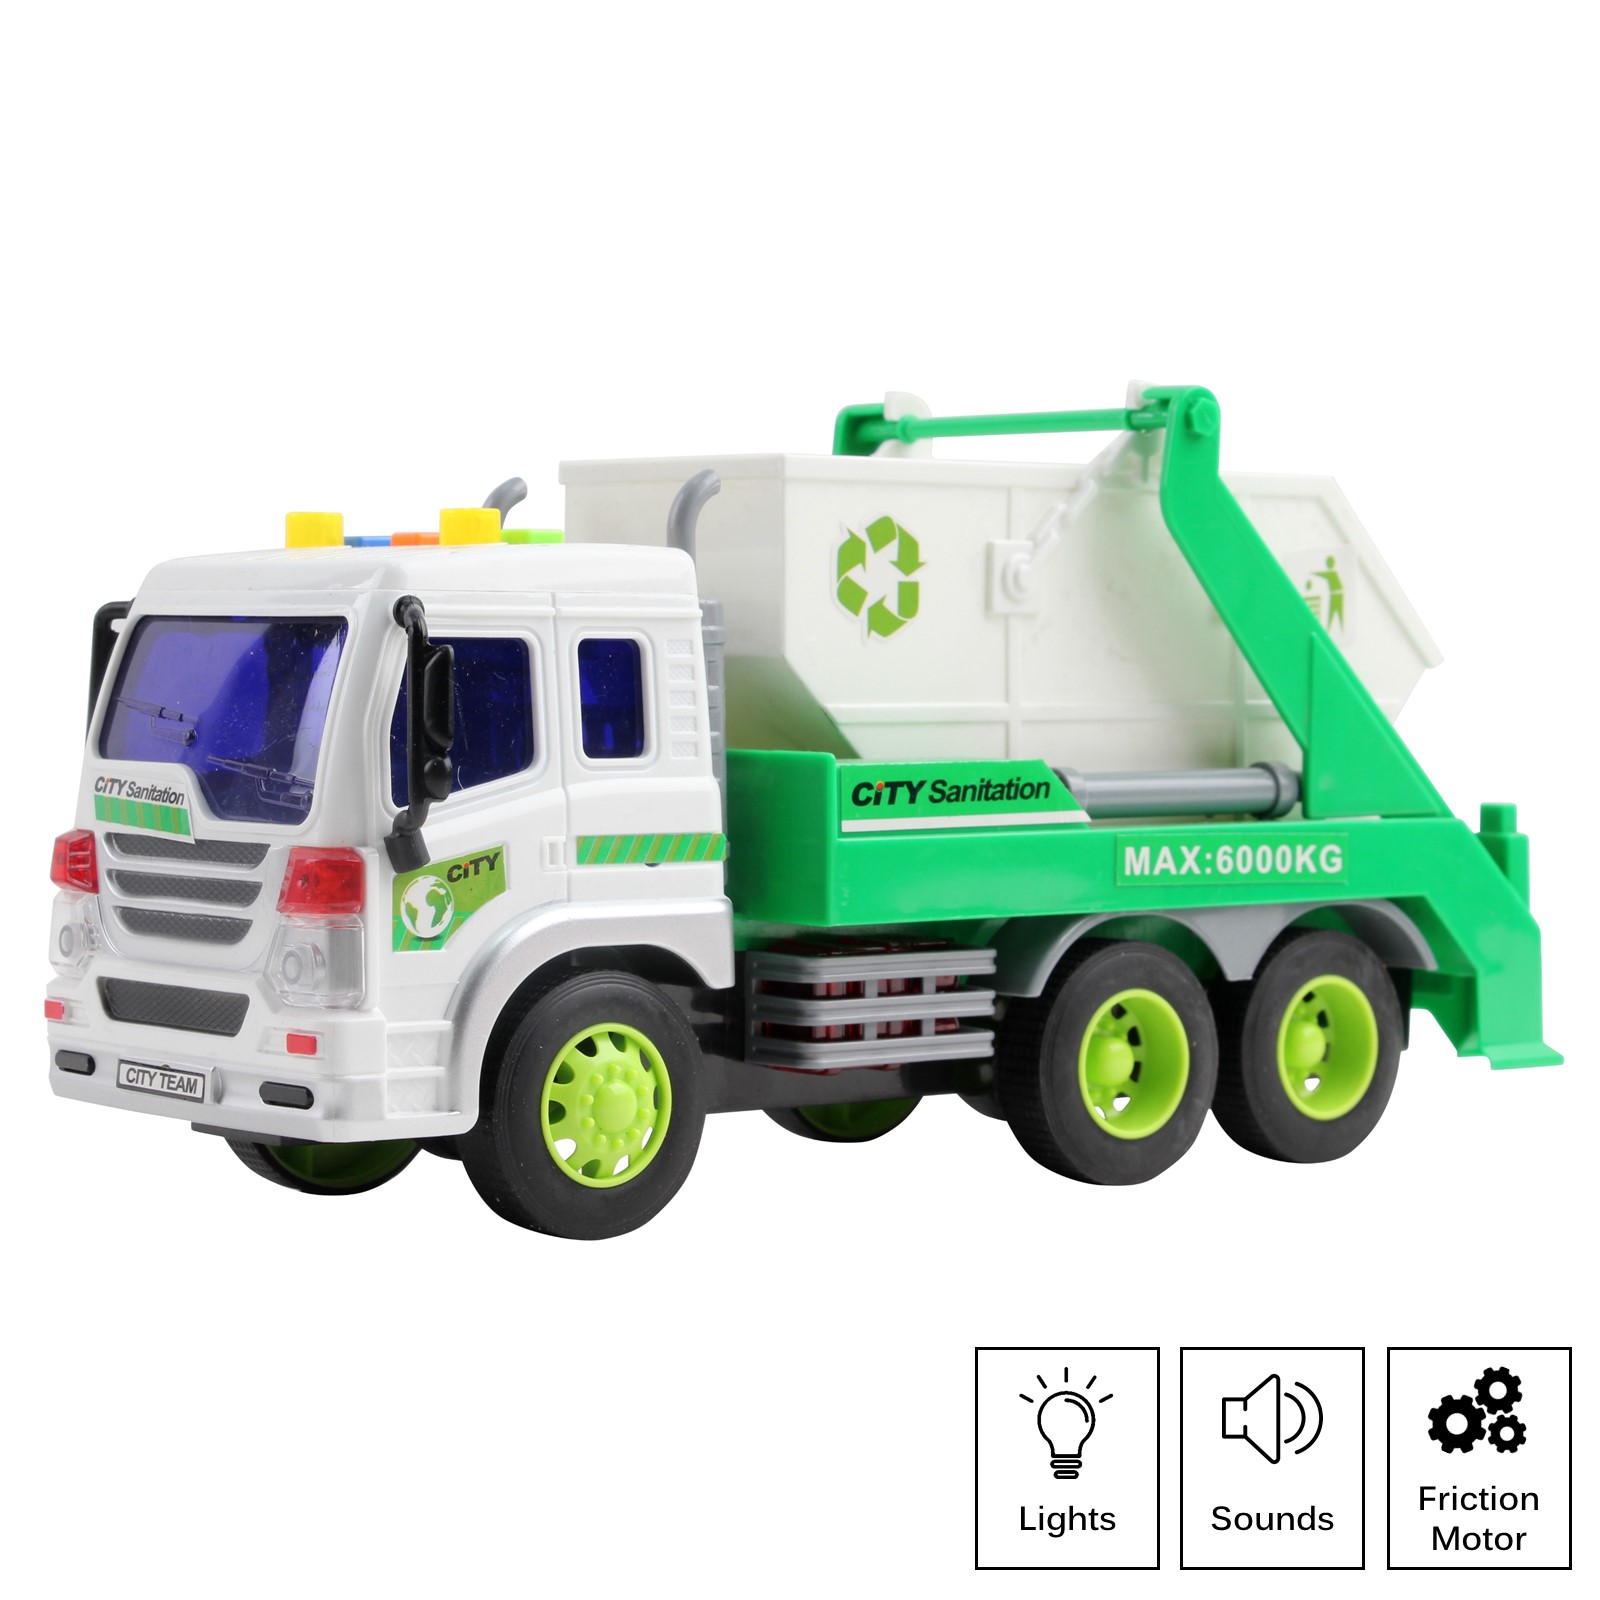 Friction Powered Garbage Truck With Lights And Sounds Lift Up Body 1:16 Scale Durable Kids Dump Sanitation Push And Go Toy Car Pretend Play Transport Vehicle Great Gift For Children Boys Girls